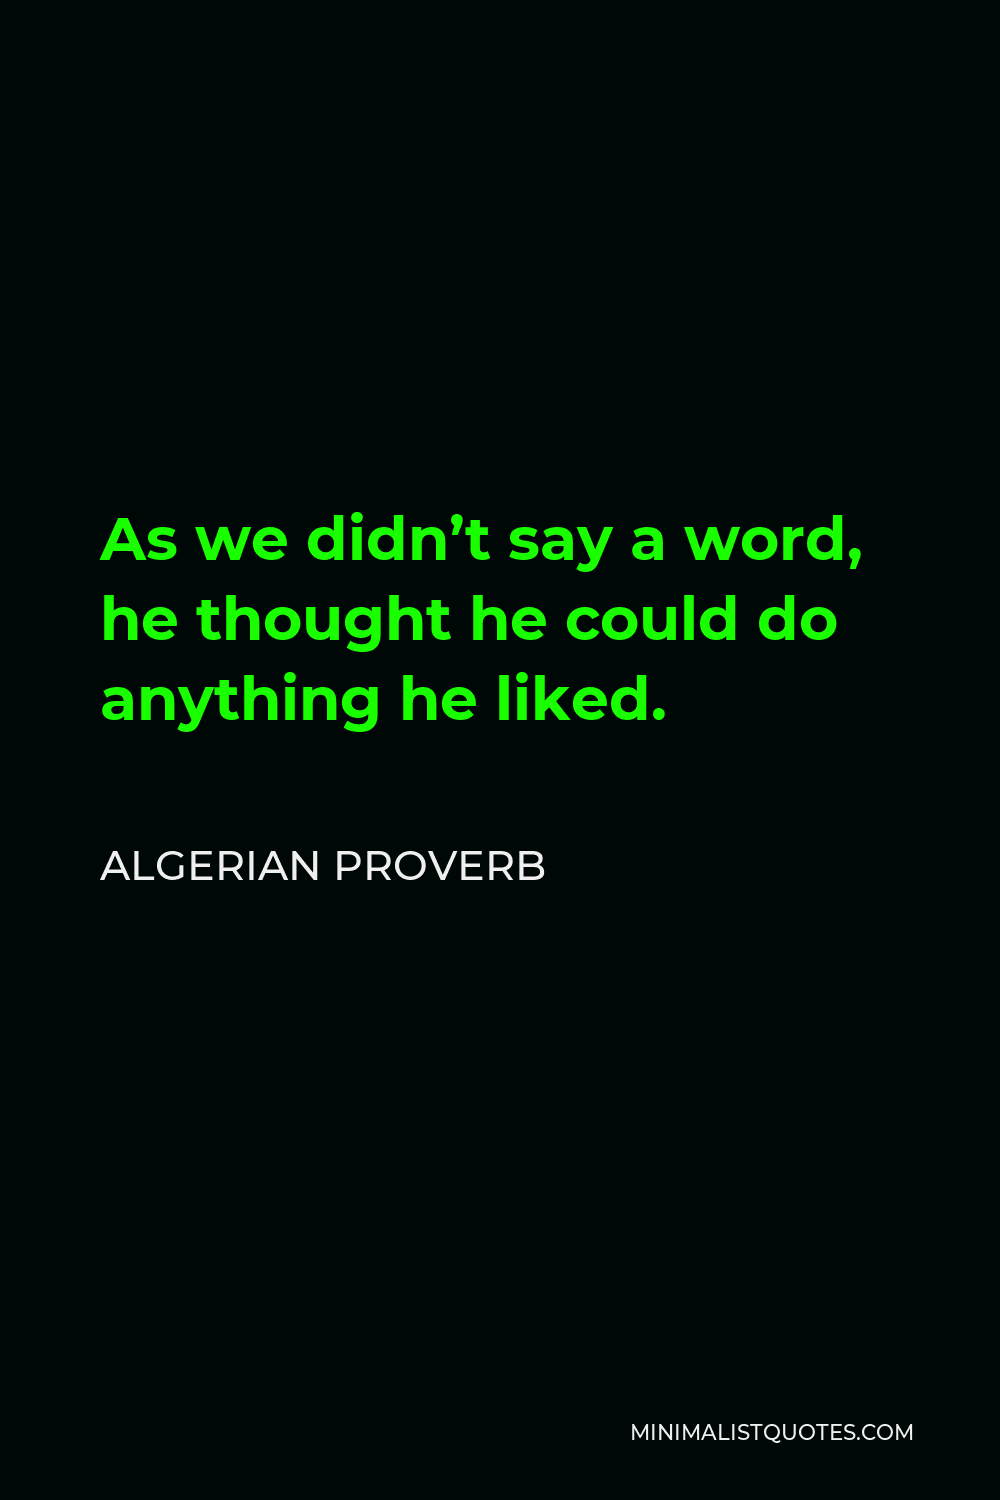 Algerian Proverb Quote - As we didn’t say a word, he thought he could do anything he liked.